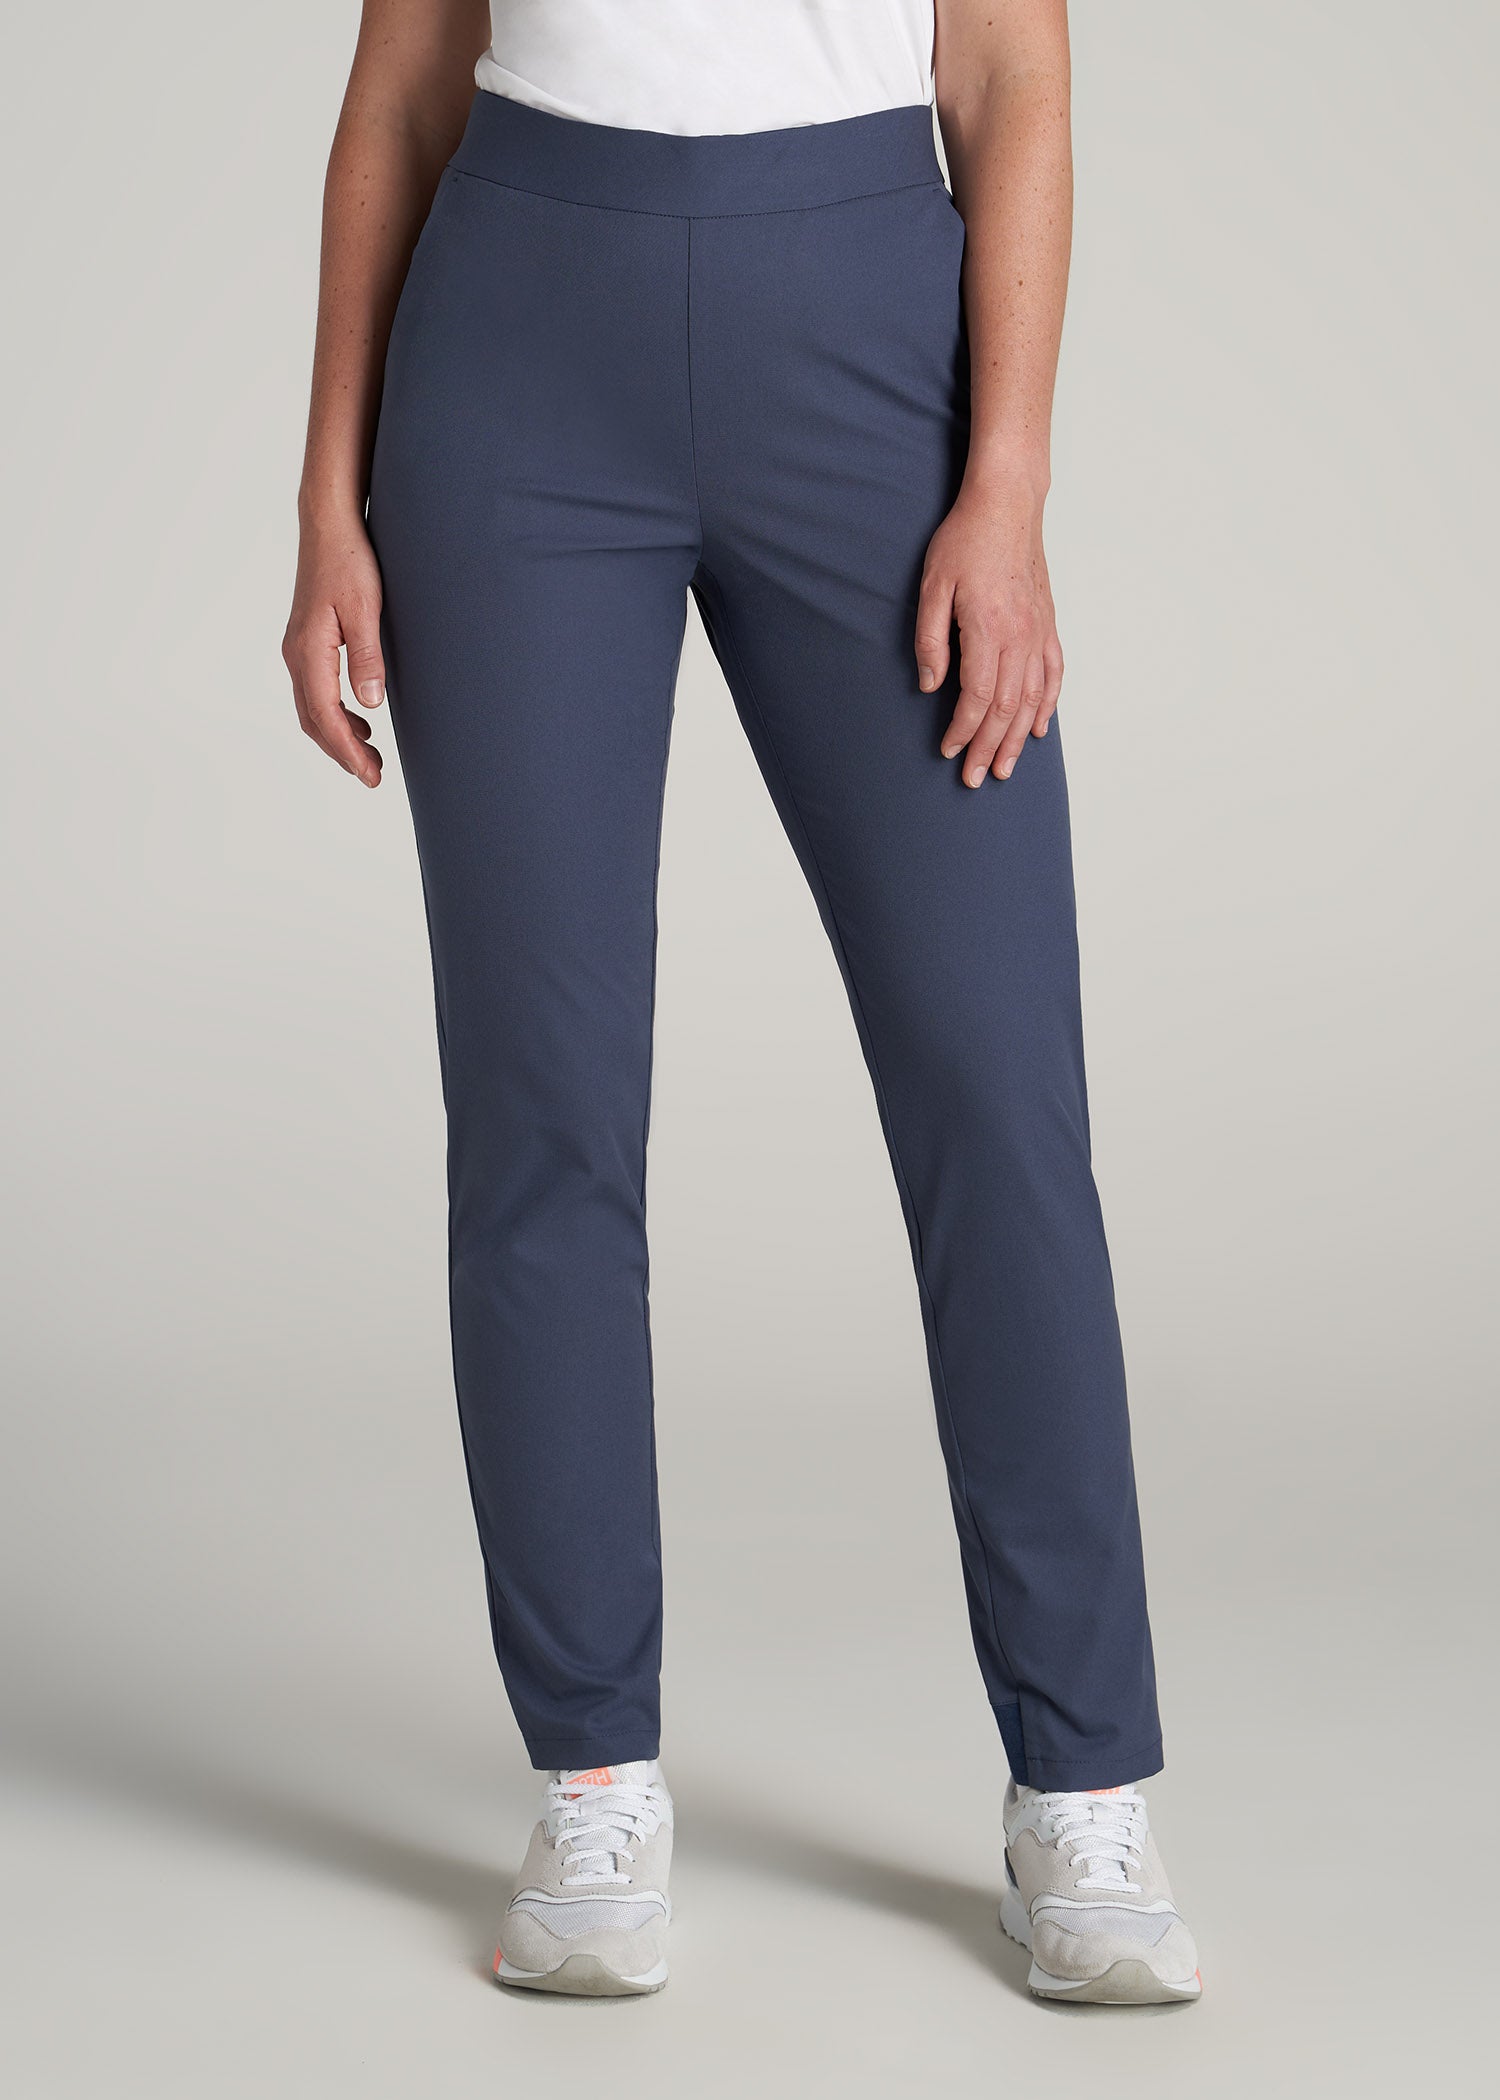    American-Tall-Women-Pull-on-Traveler-Pant-Smoky-Blue-front